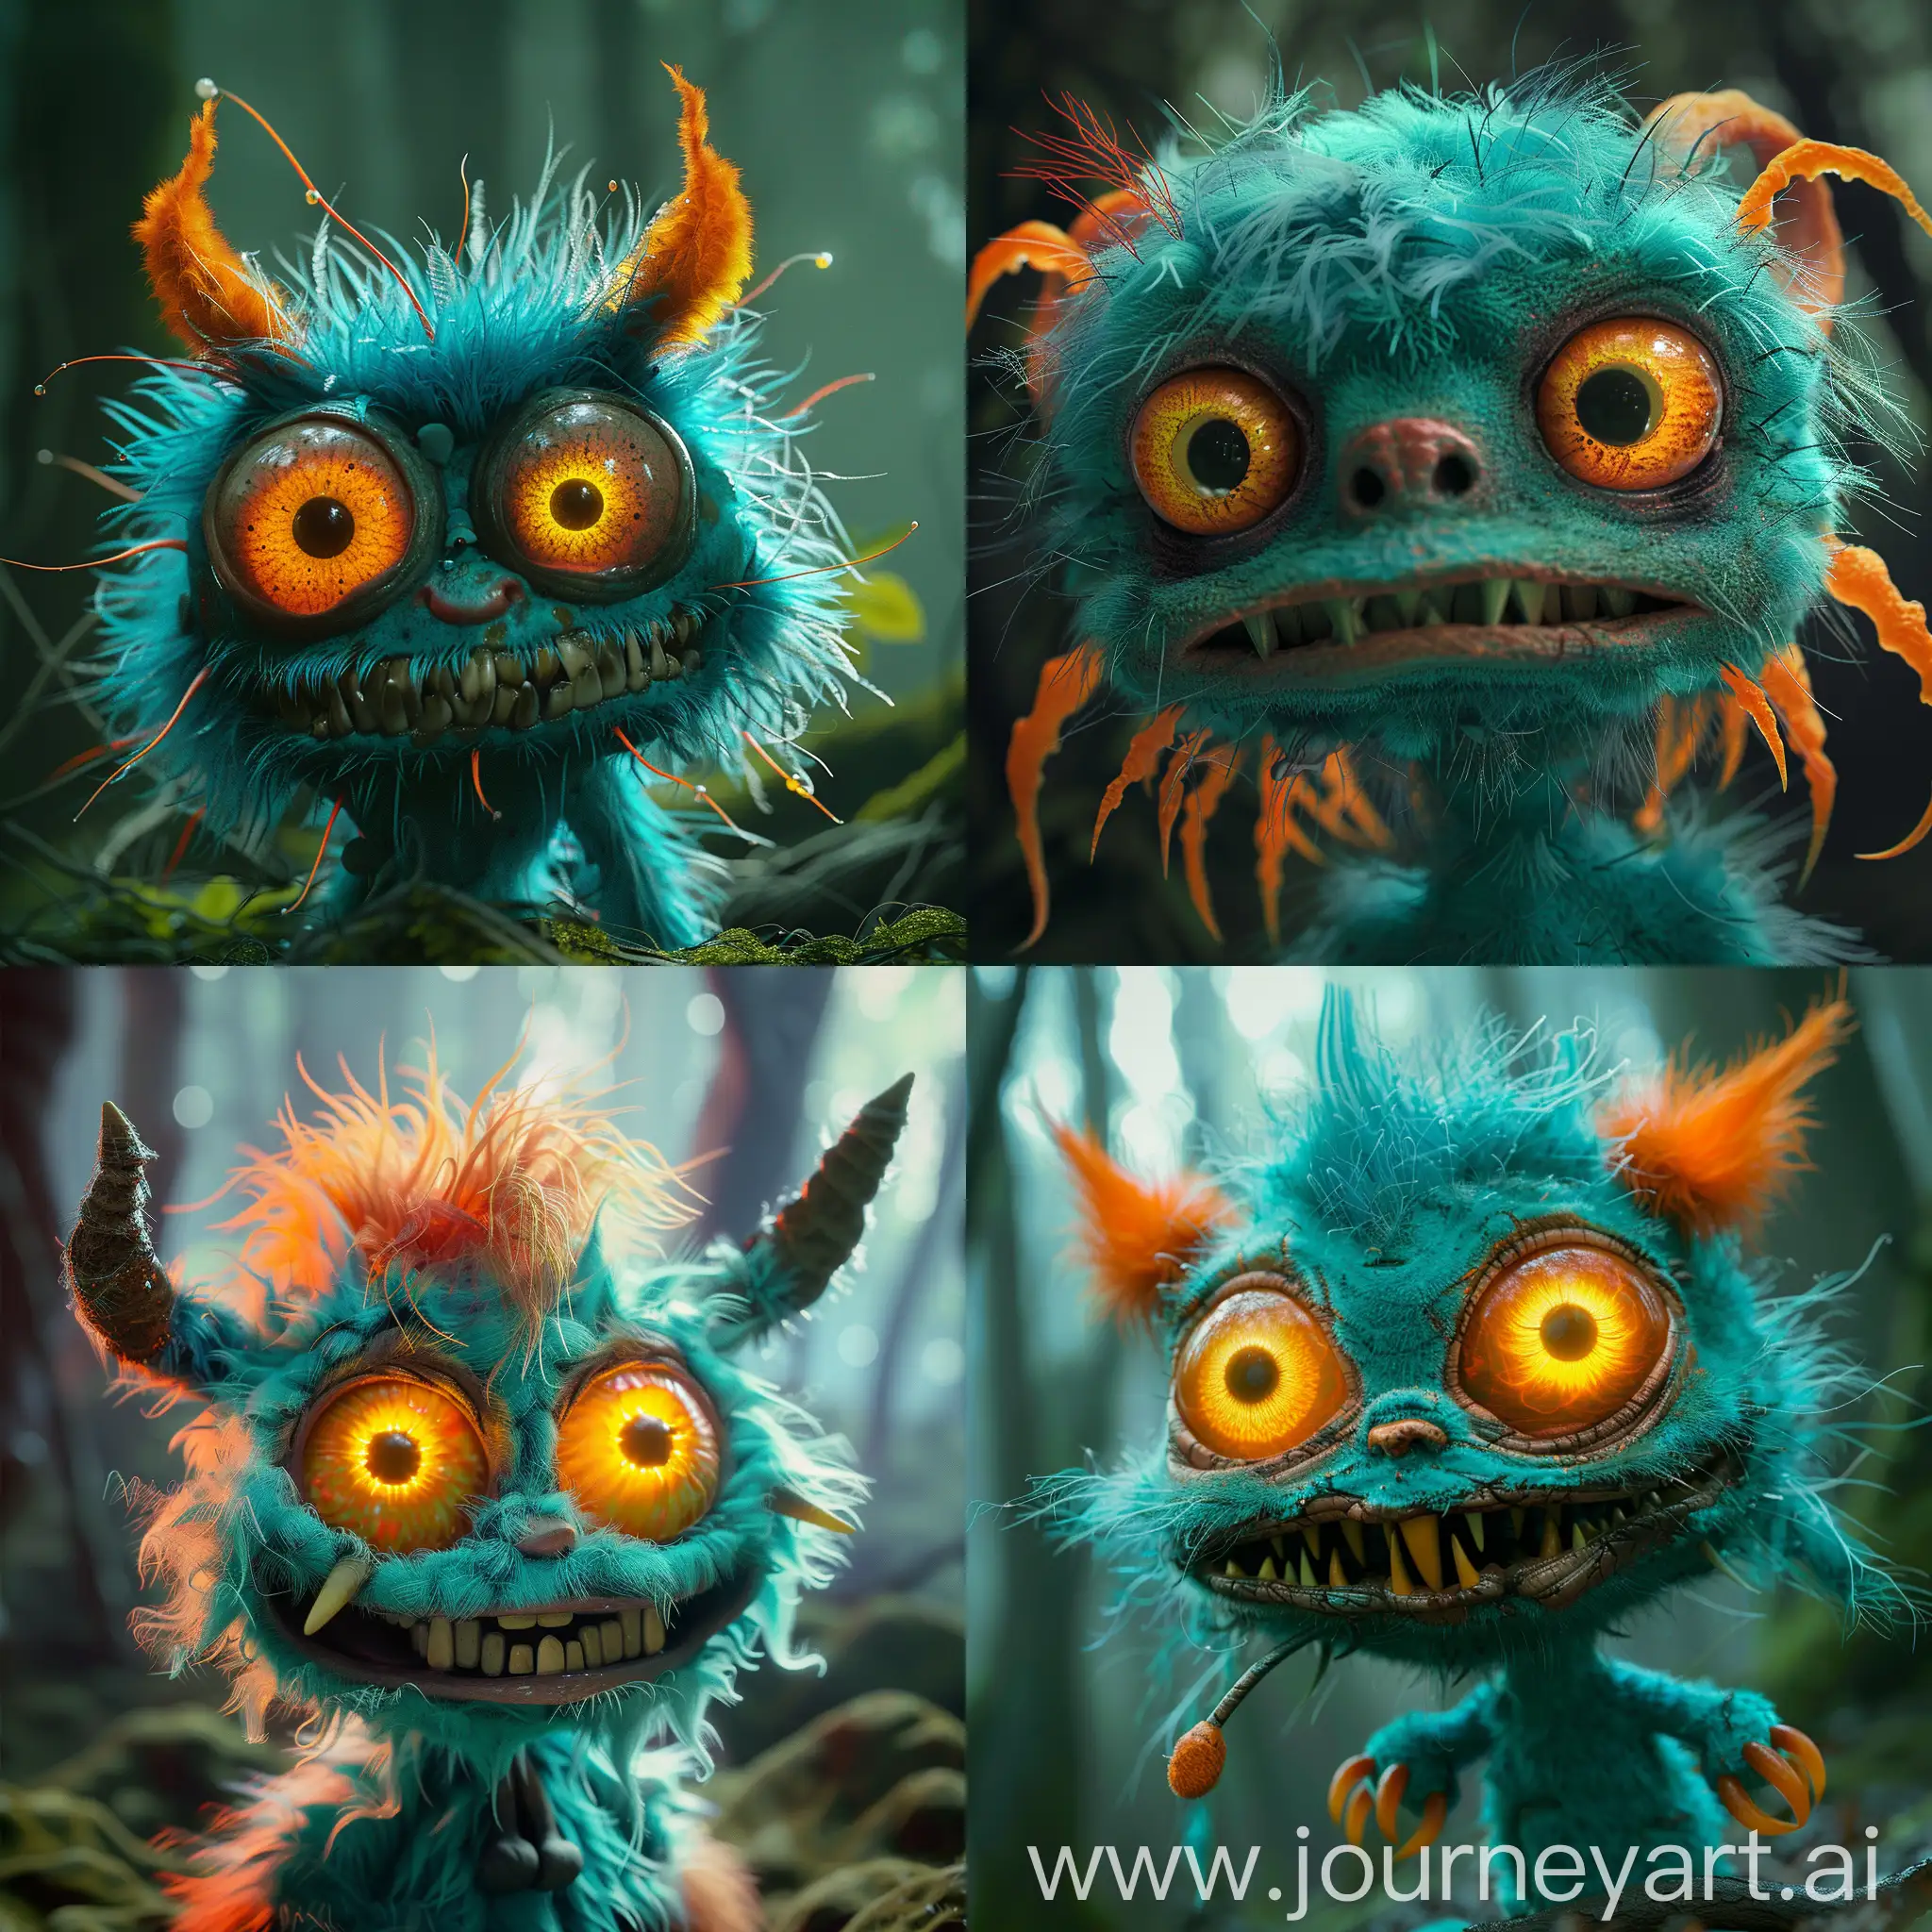 Playful-Turquoise-Creature-with-Glowing-Eyes-in-Forest-Punk-Setting